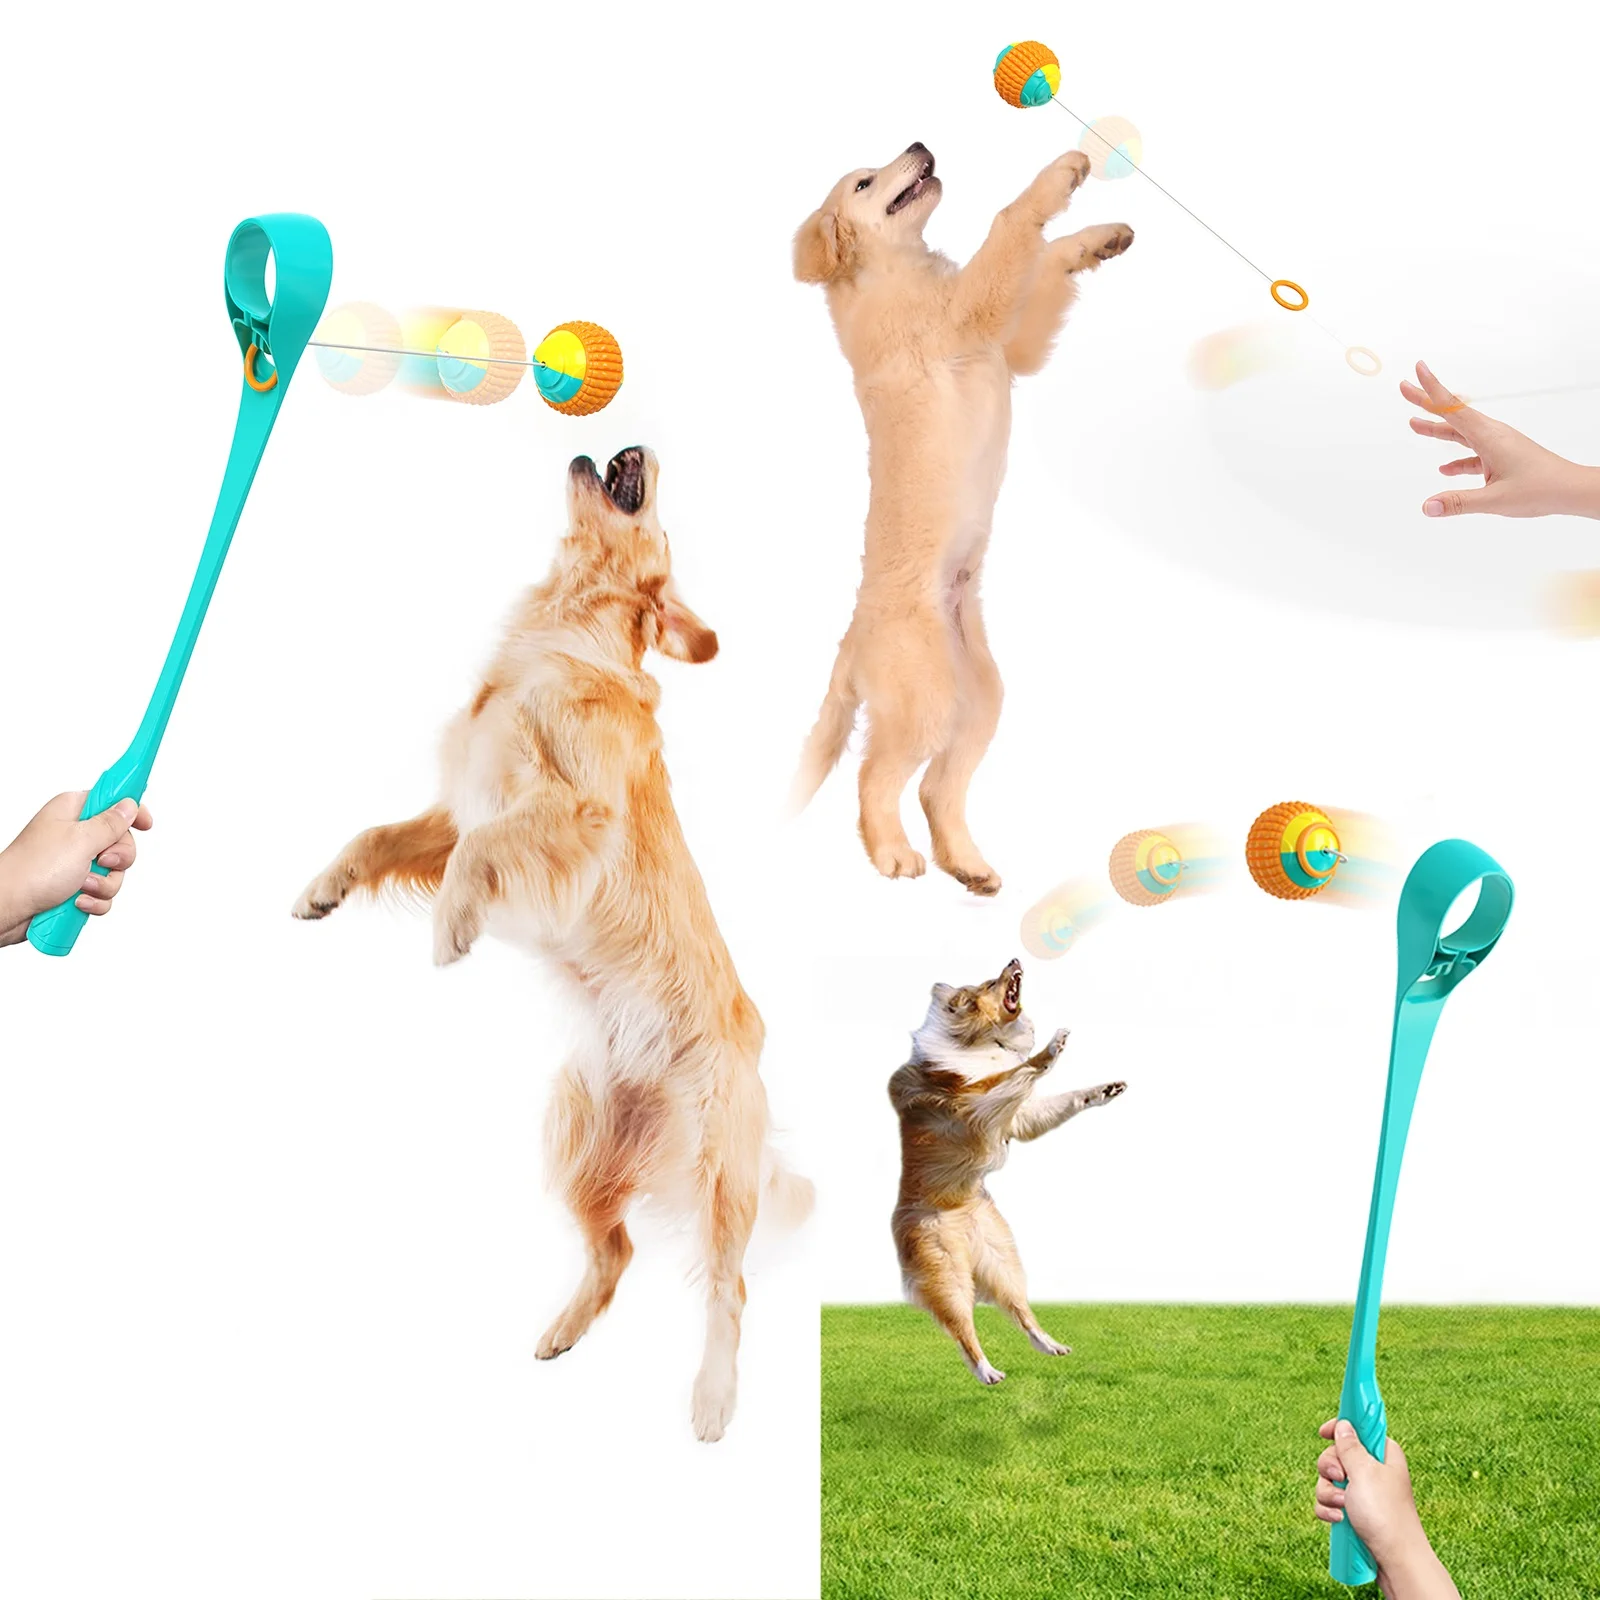 

Secure pet dog accessories throwing stick outdoor interactive walking ball outdoor training gnaw puppy chew pet toy dog chew toy, D/blue,blue,yellow